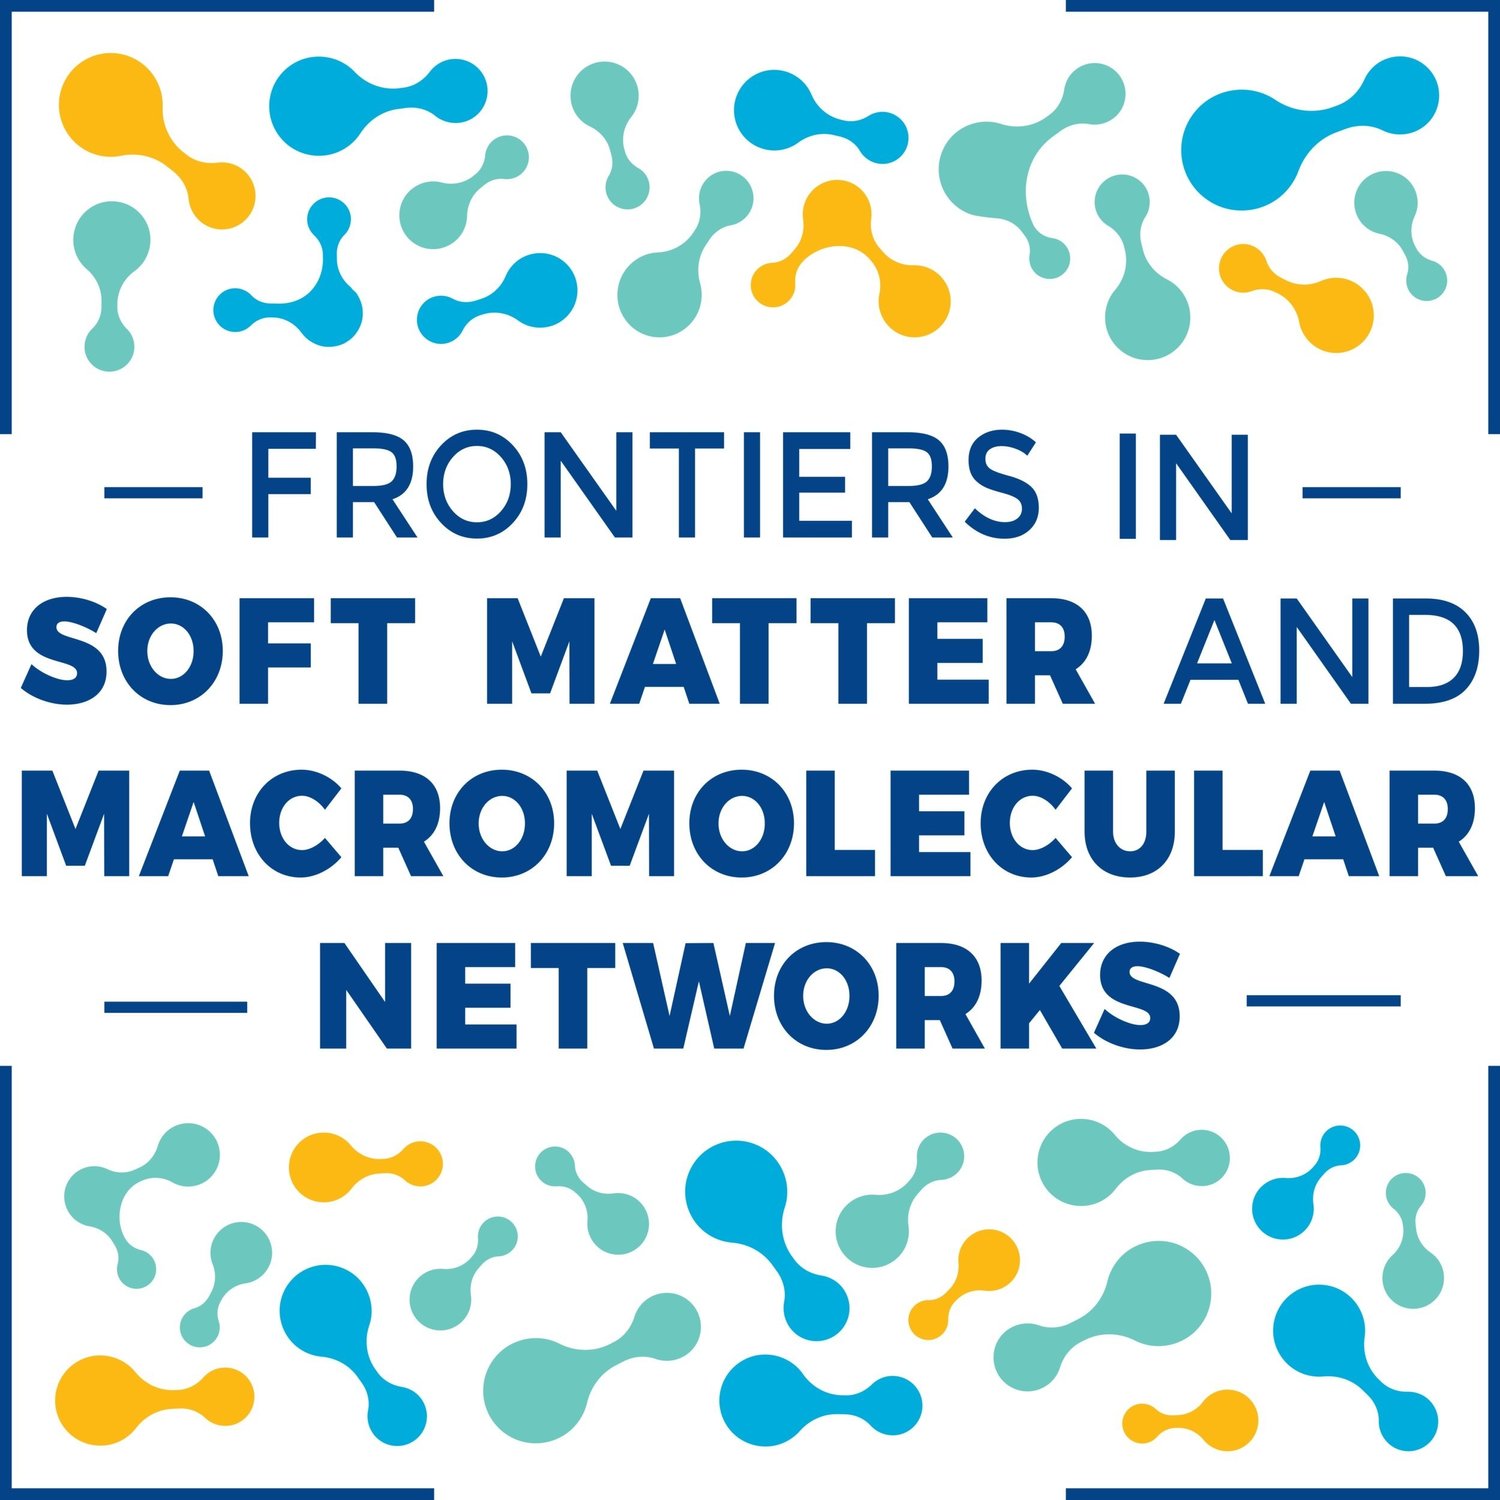 Frontiers in soft matter and macromolecular networks logo